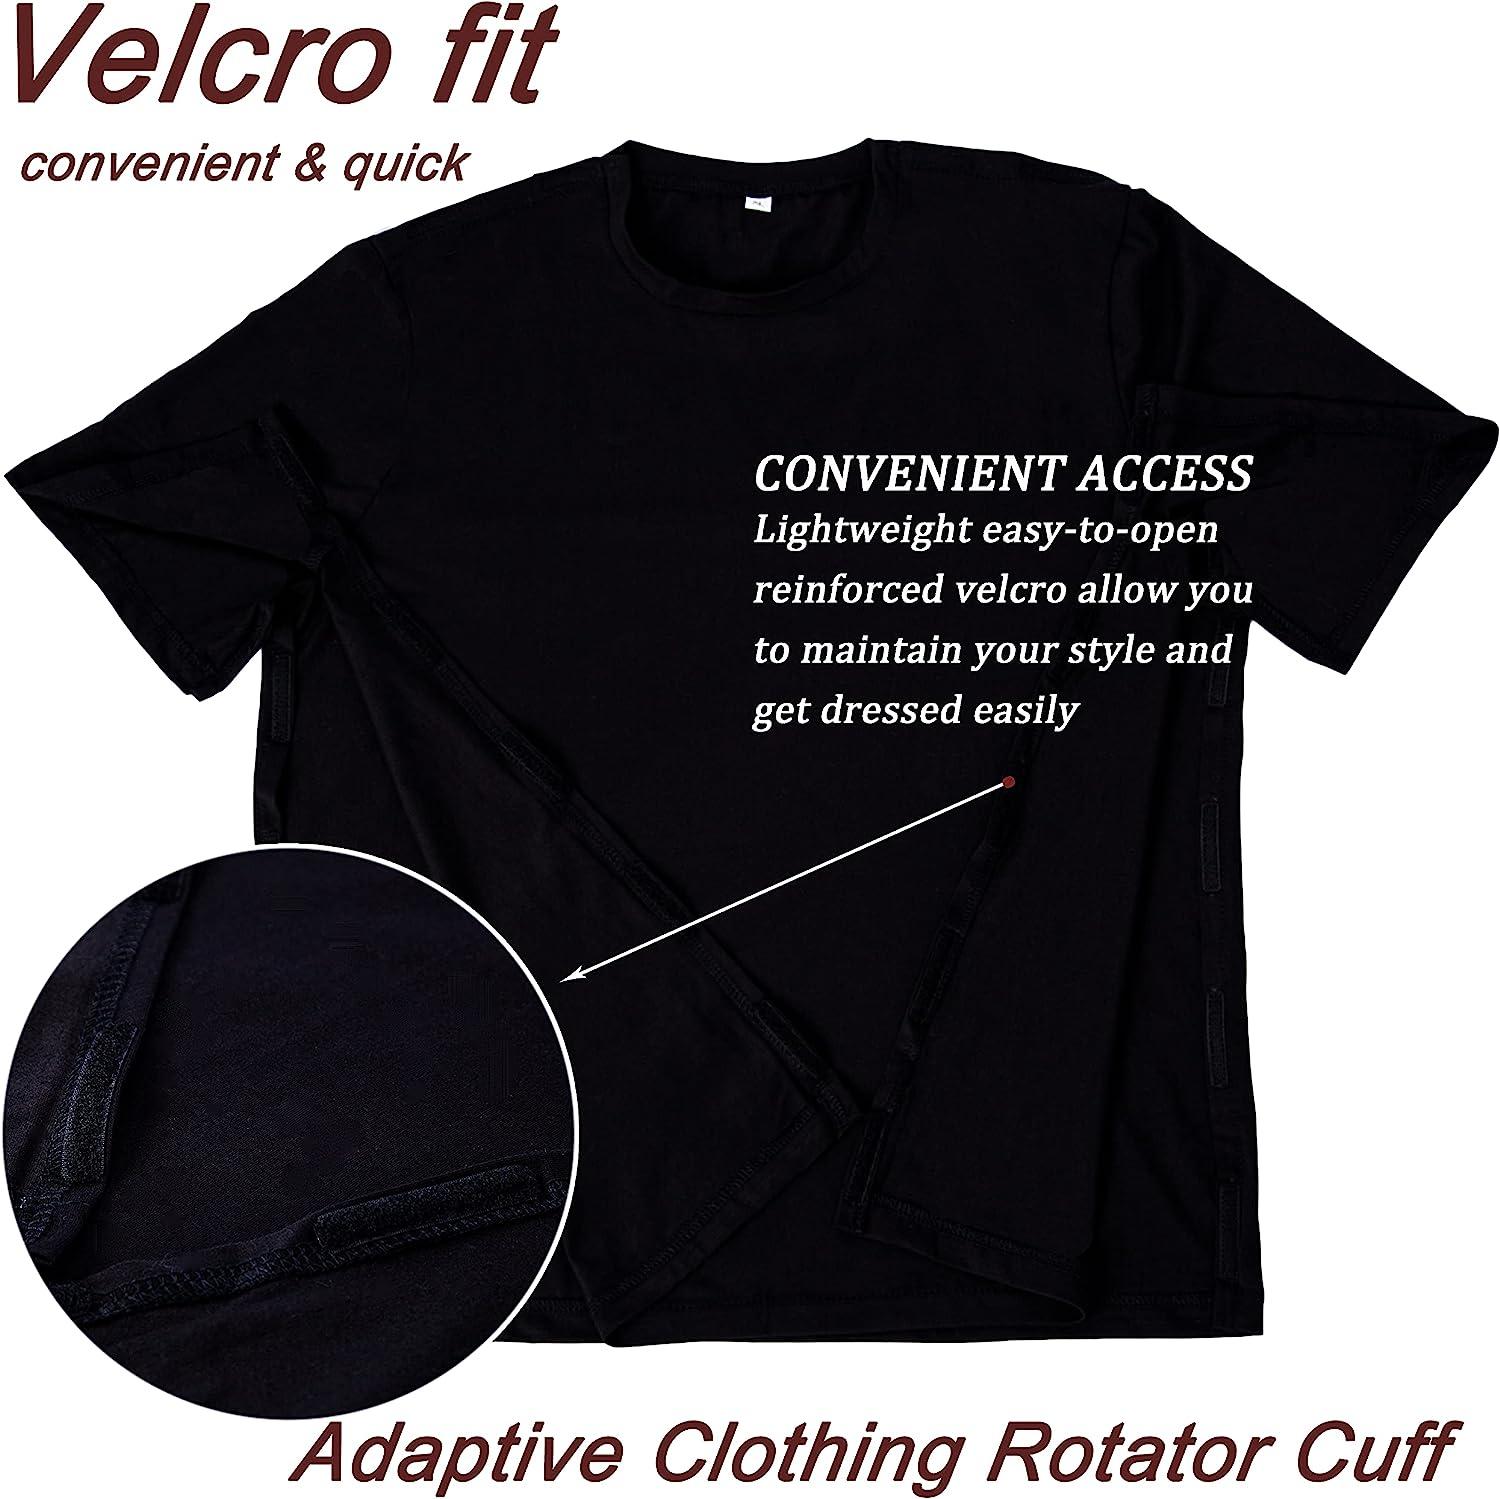 Post Shoulder Surgery Recovery & Rehab Shirt with Stick On Fasteners 